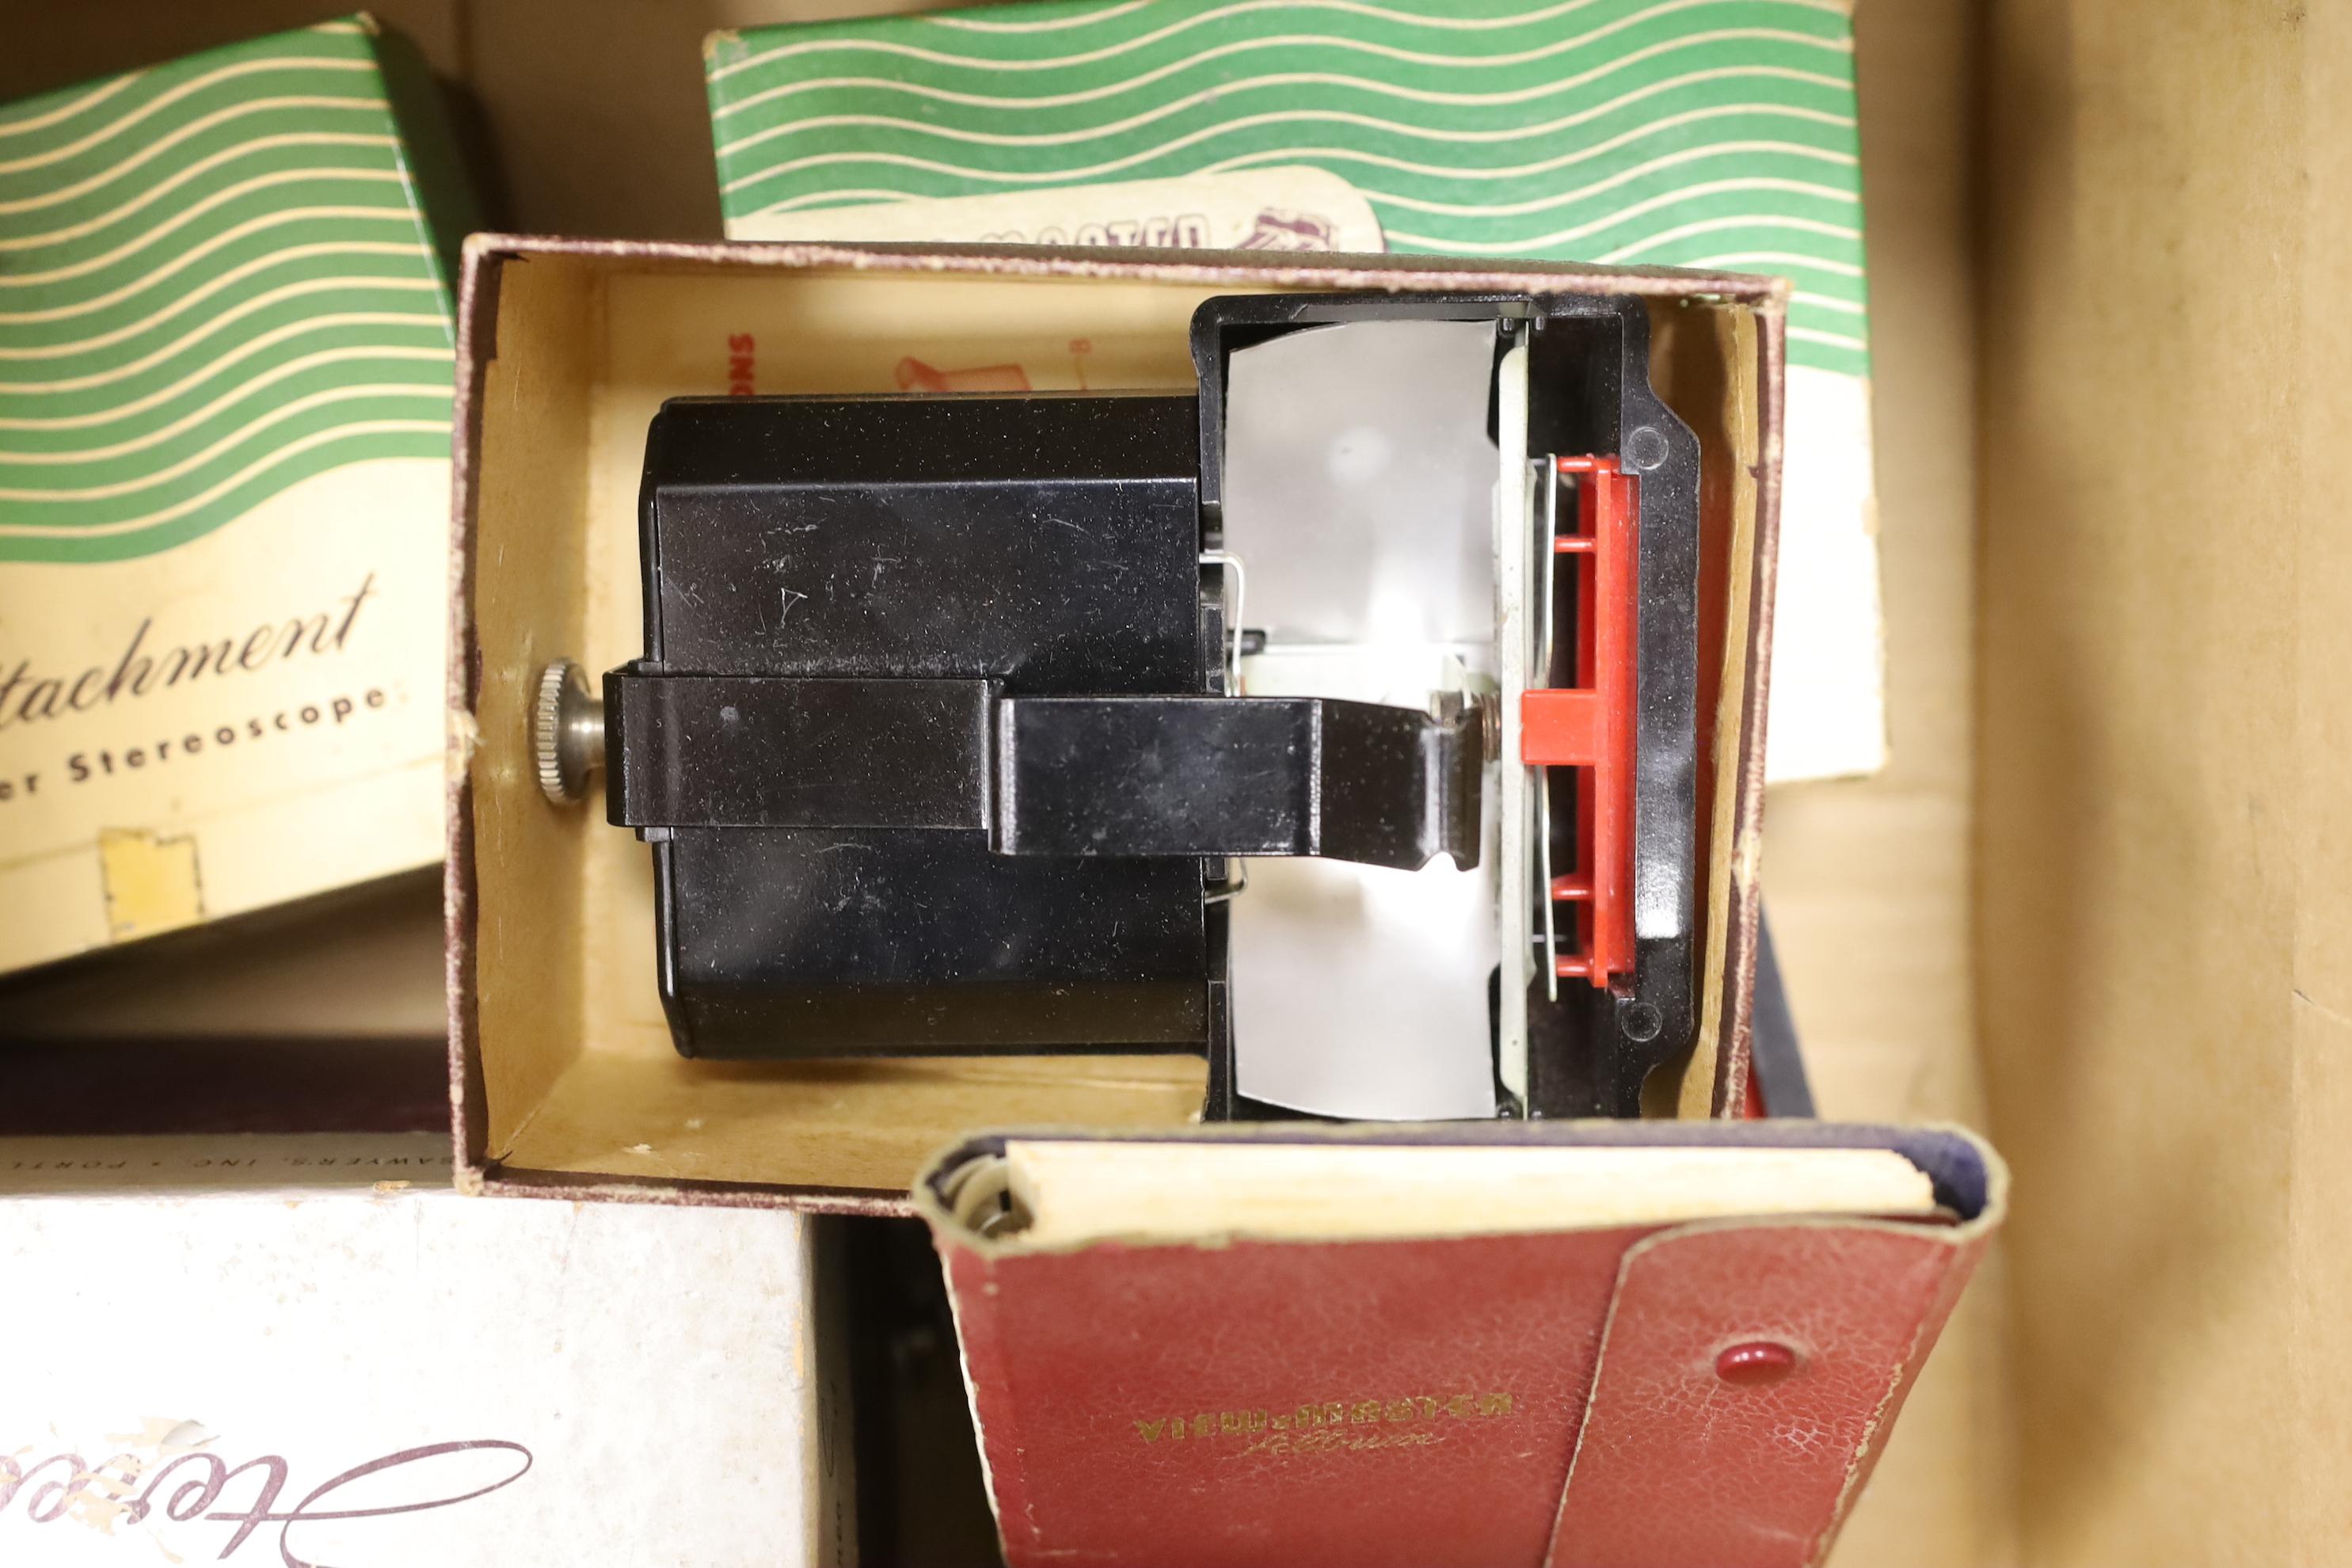 A boxed View-Master model C stereo set, three light attachments with original boxes, a loose light attachment and a View-Master Album